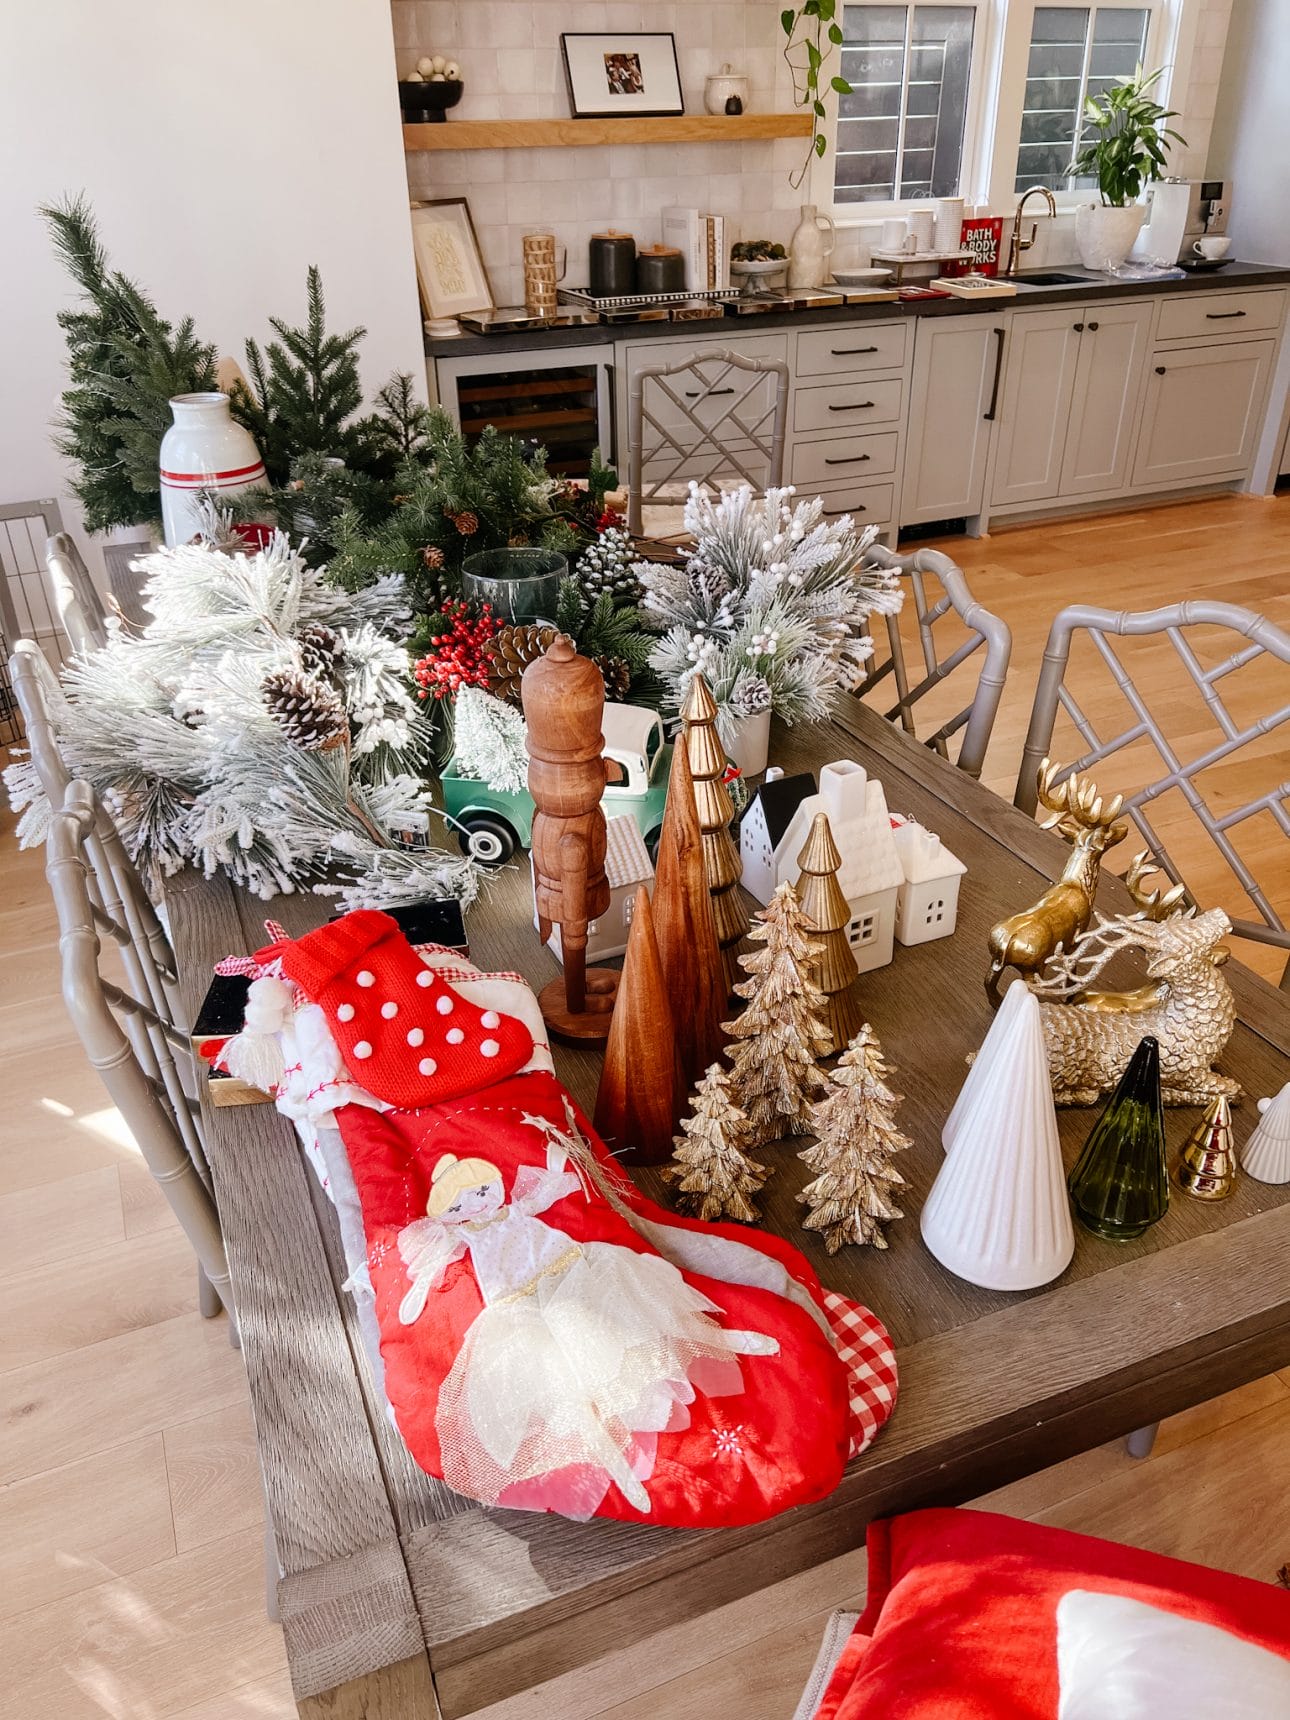 These Brilliant Christmas Ornament Storage Ideas Will Keep You